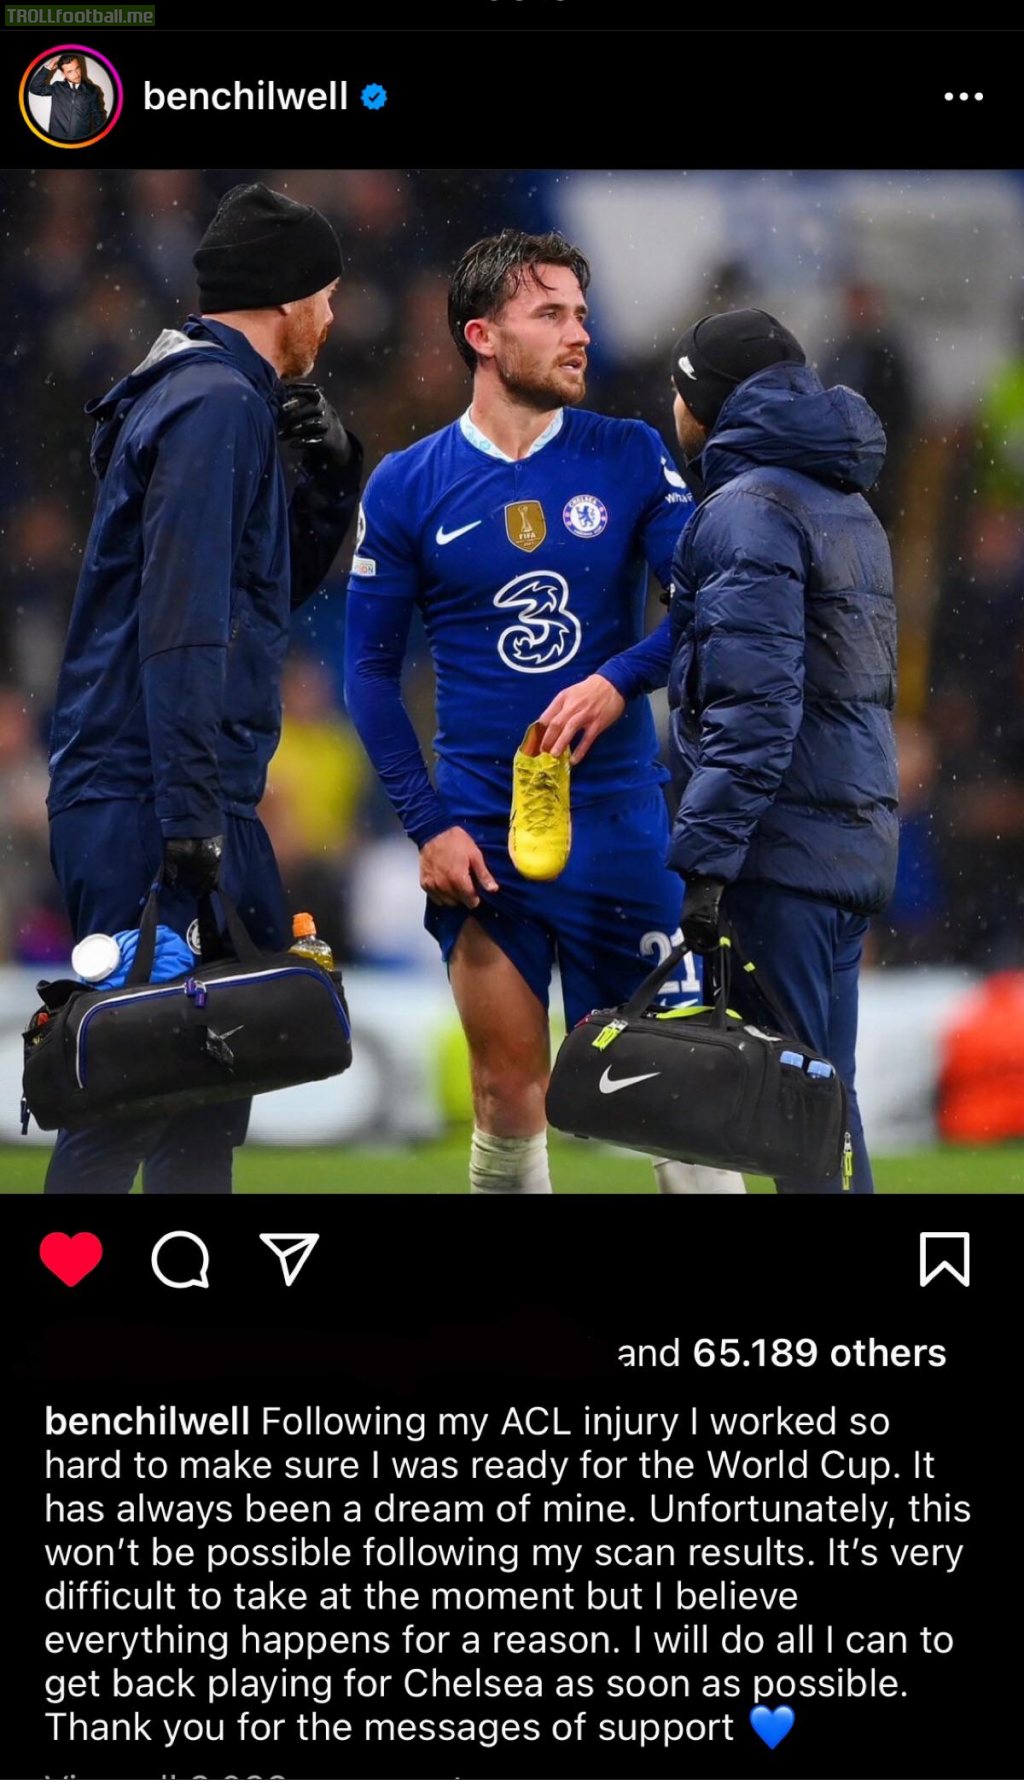 [Ben Chilwell] Following my ACL injury I worked so hard to make sure I was ready for the World Cup. It has always been a dream of mine. Unfortunately, this won’t be possible following my scan results. I’ll do all I can to get back playing for Chelsea ASAP. Thanks for the messages of support